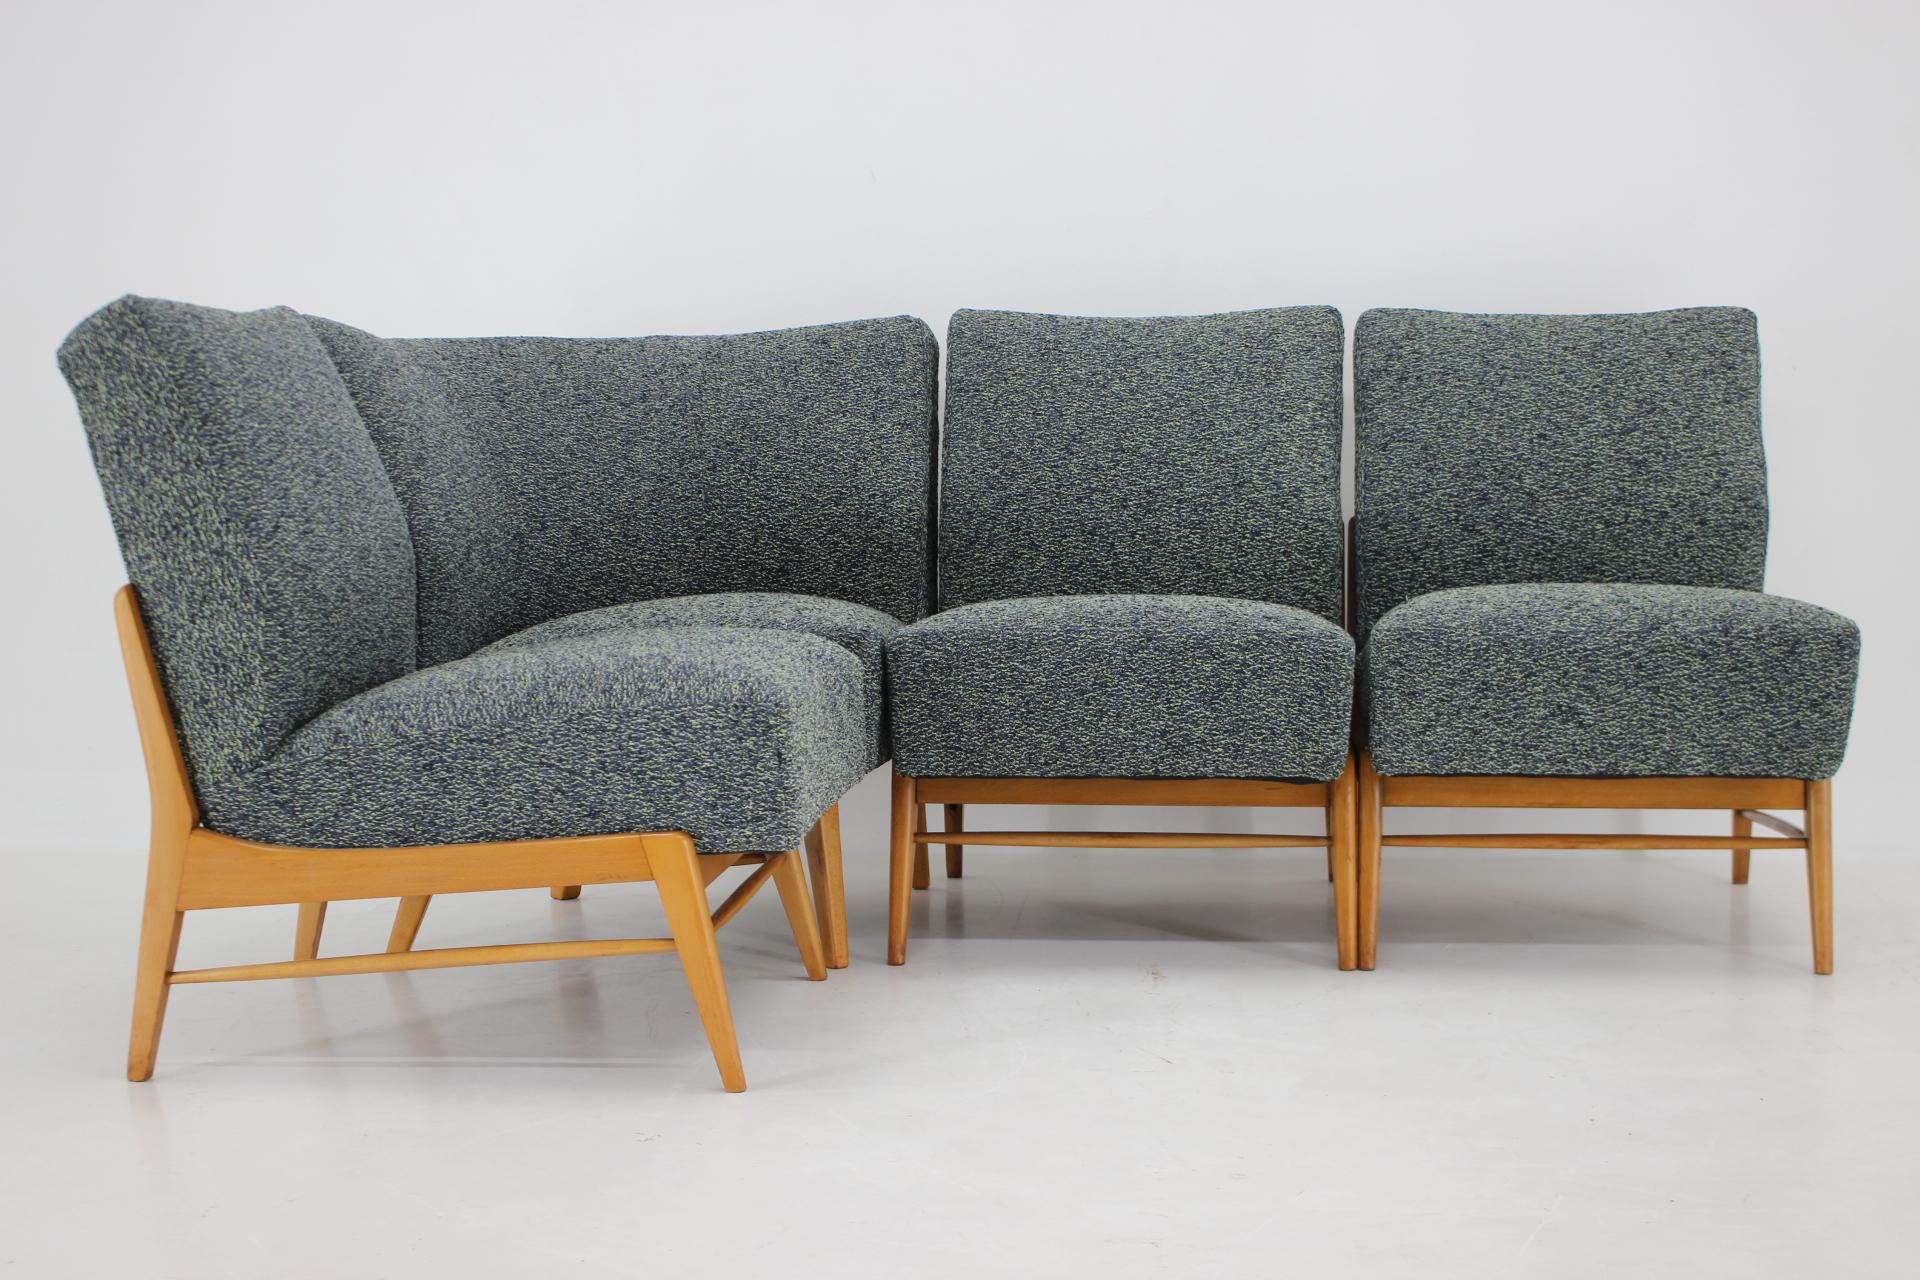 - Newly Upholstered In quality 100% recycled KIRGBY fabric named SPIRAL
- Wooden parts have been refurbished.